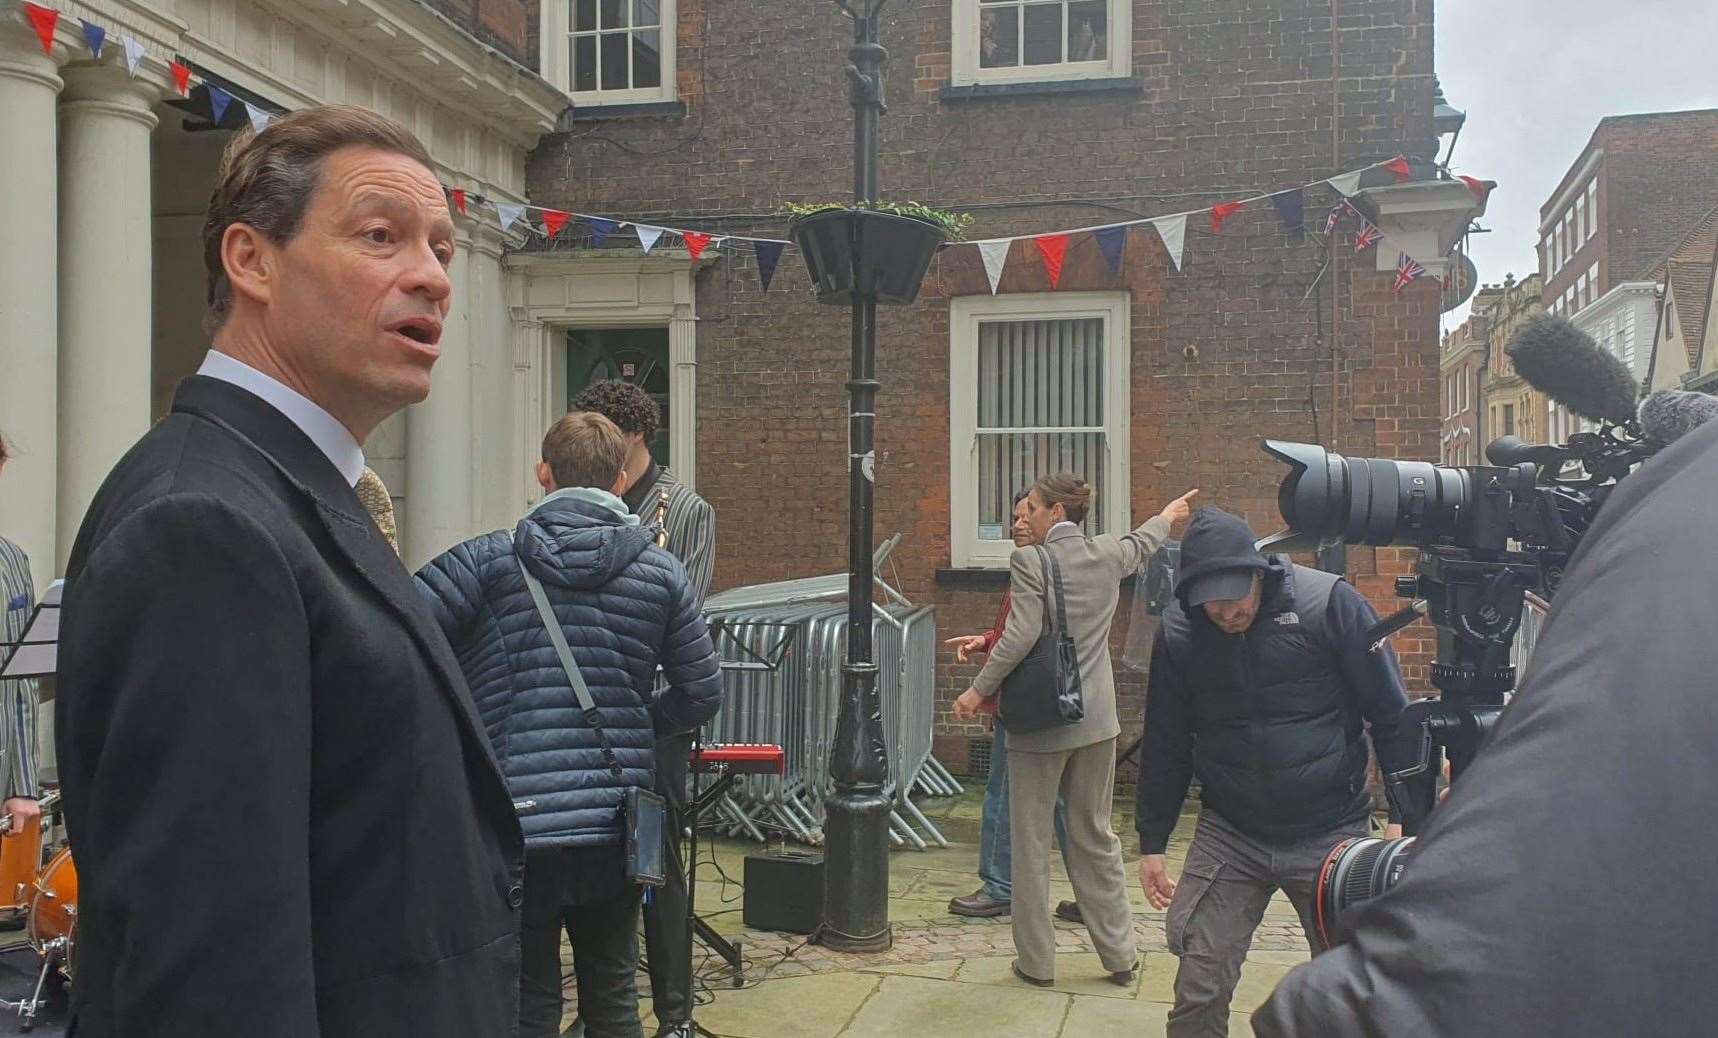 Dominic West in Rochester for the filming of The Crown